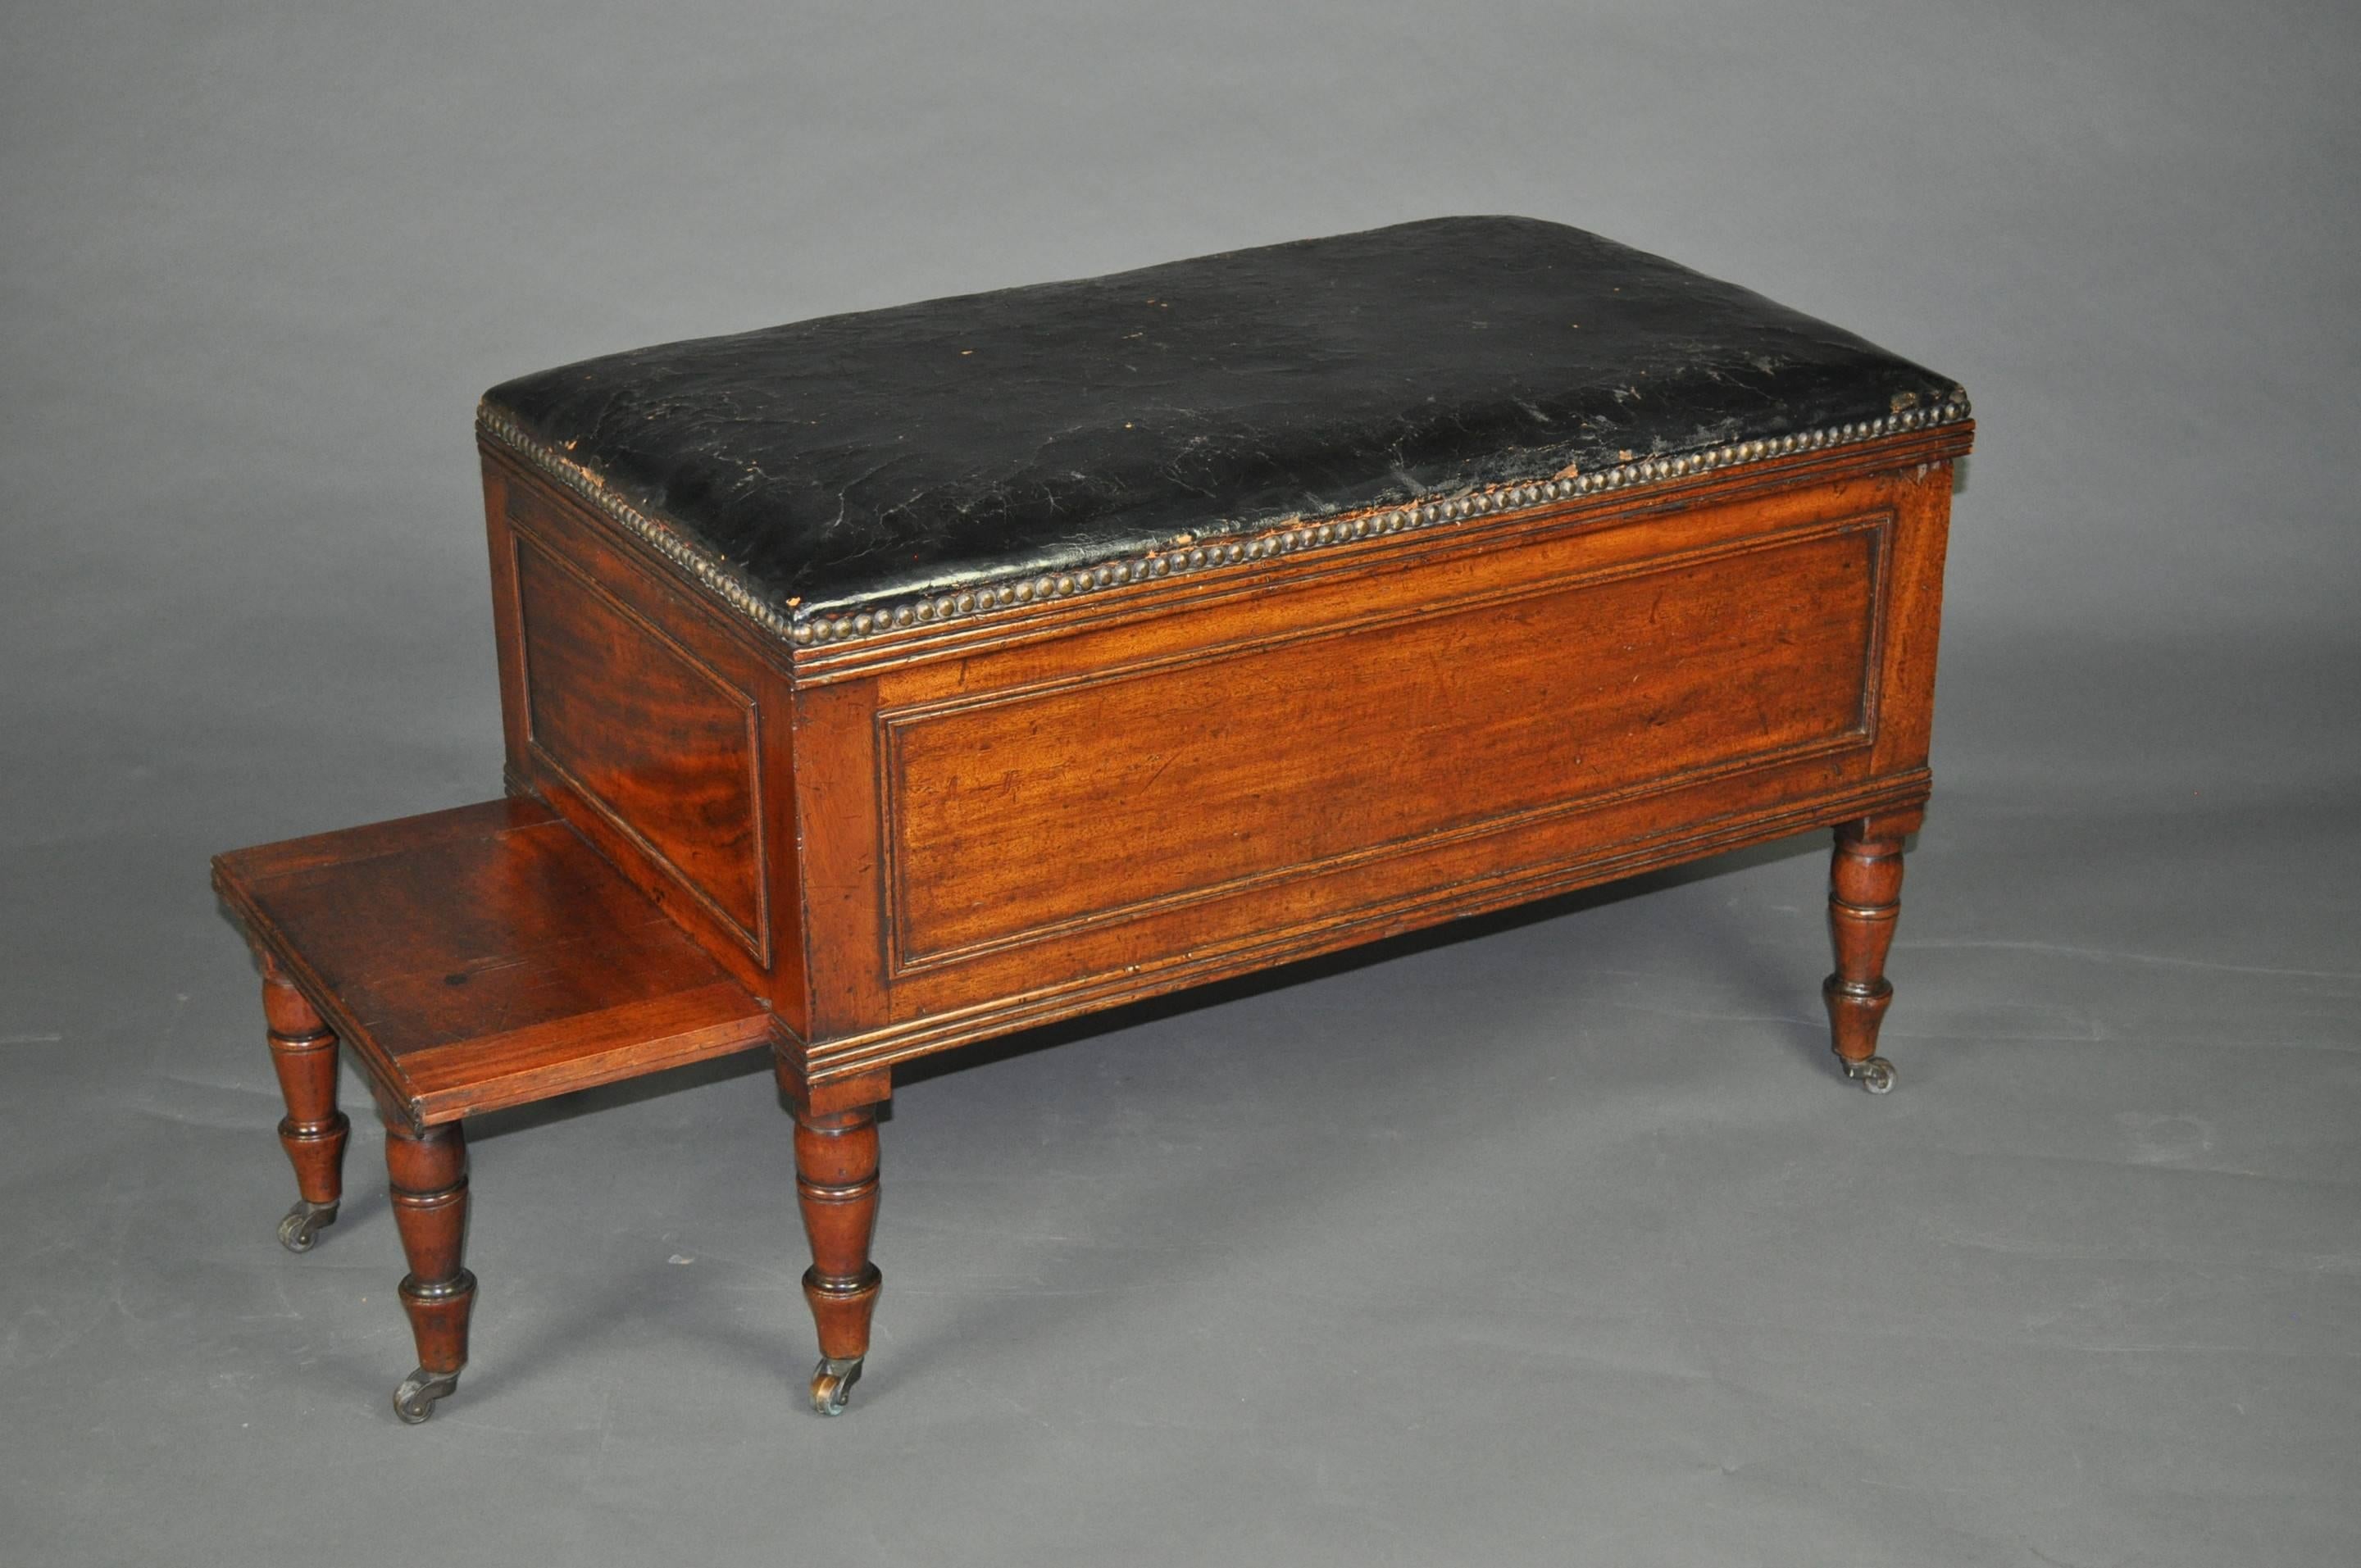 A rare and unusual metamorphic Regency stool which converts to a set of Library steps. The rectangular top covered in the original black leather above panelled sides and raised on ring-turned legs with brass cups and castors. The top opening to